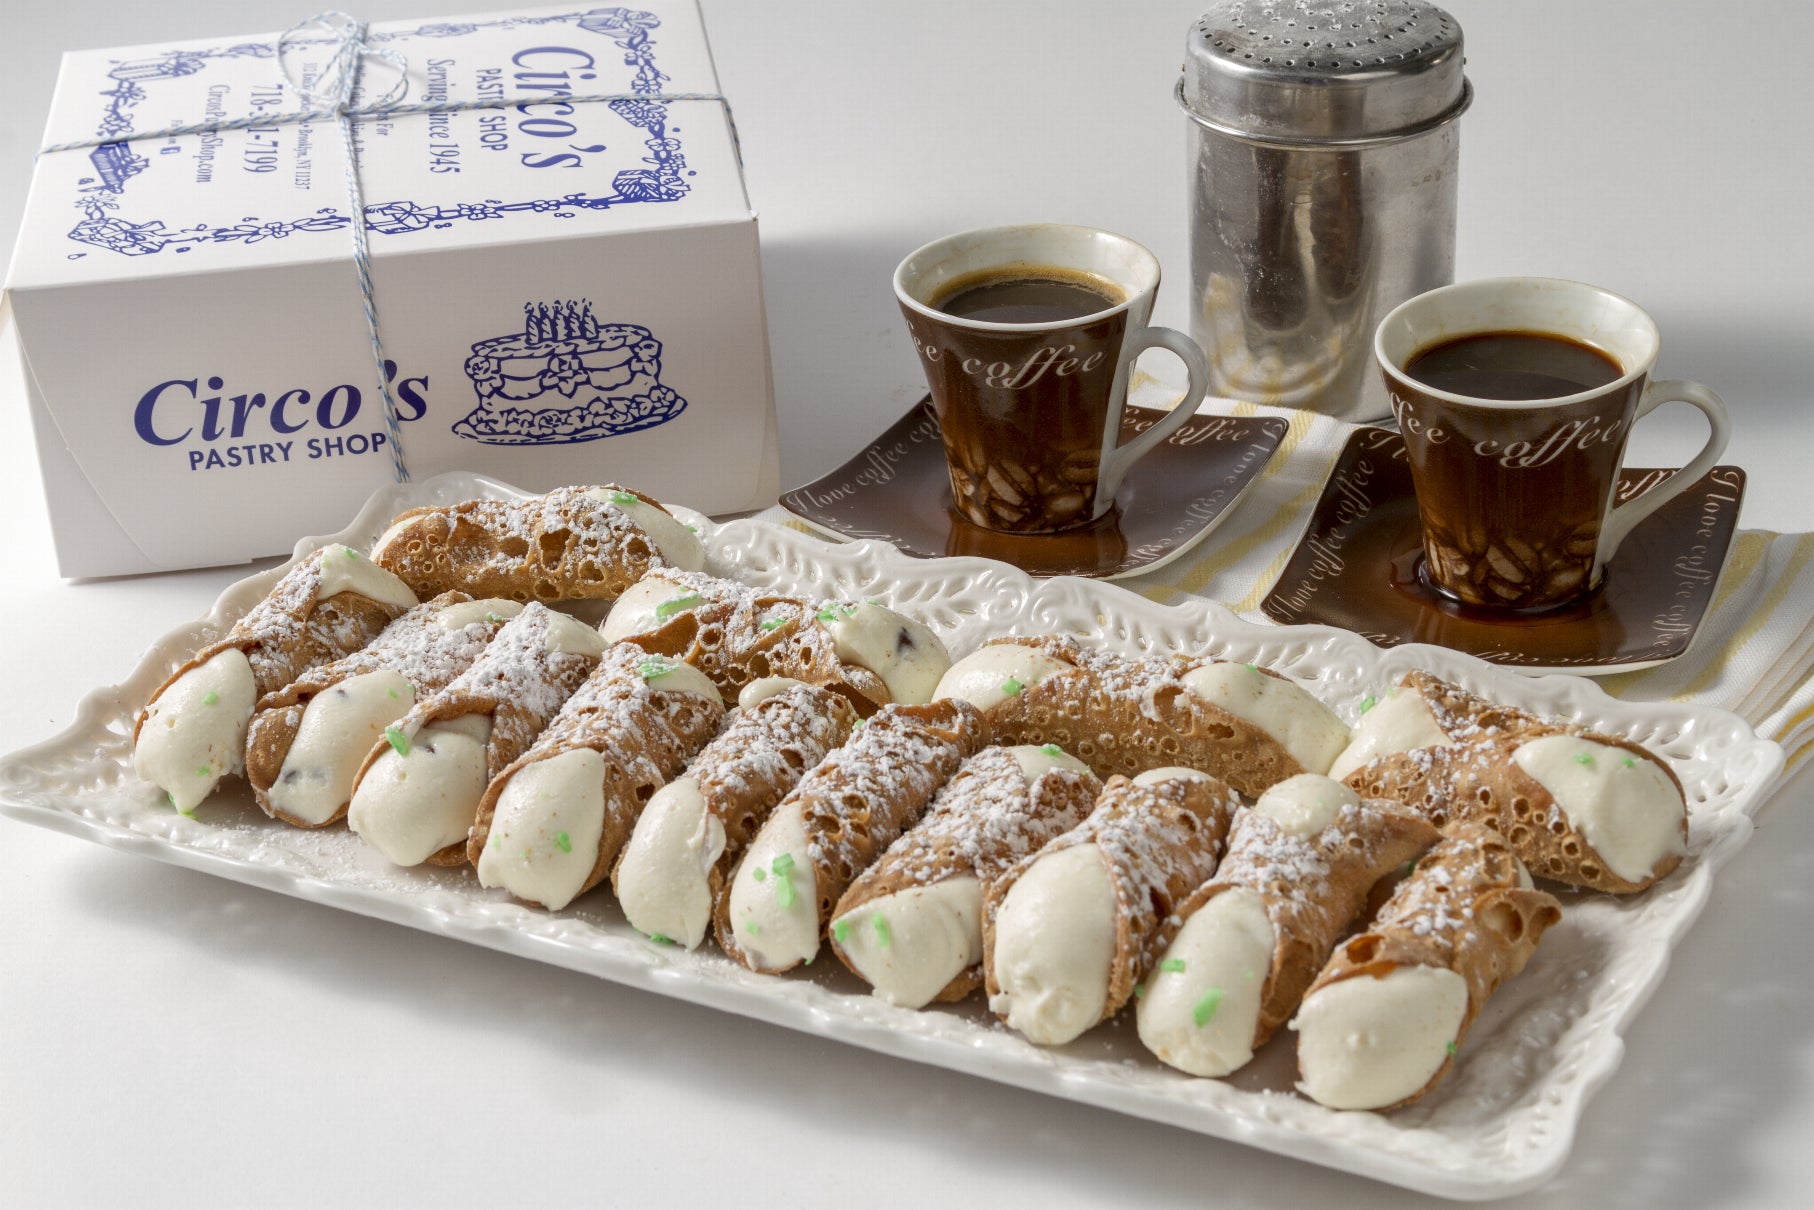 Small Cannoli (1 LB Box about 13 pieces)